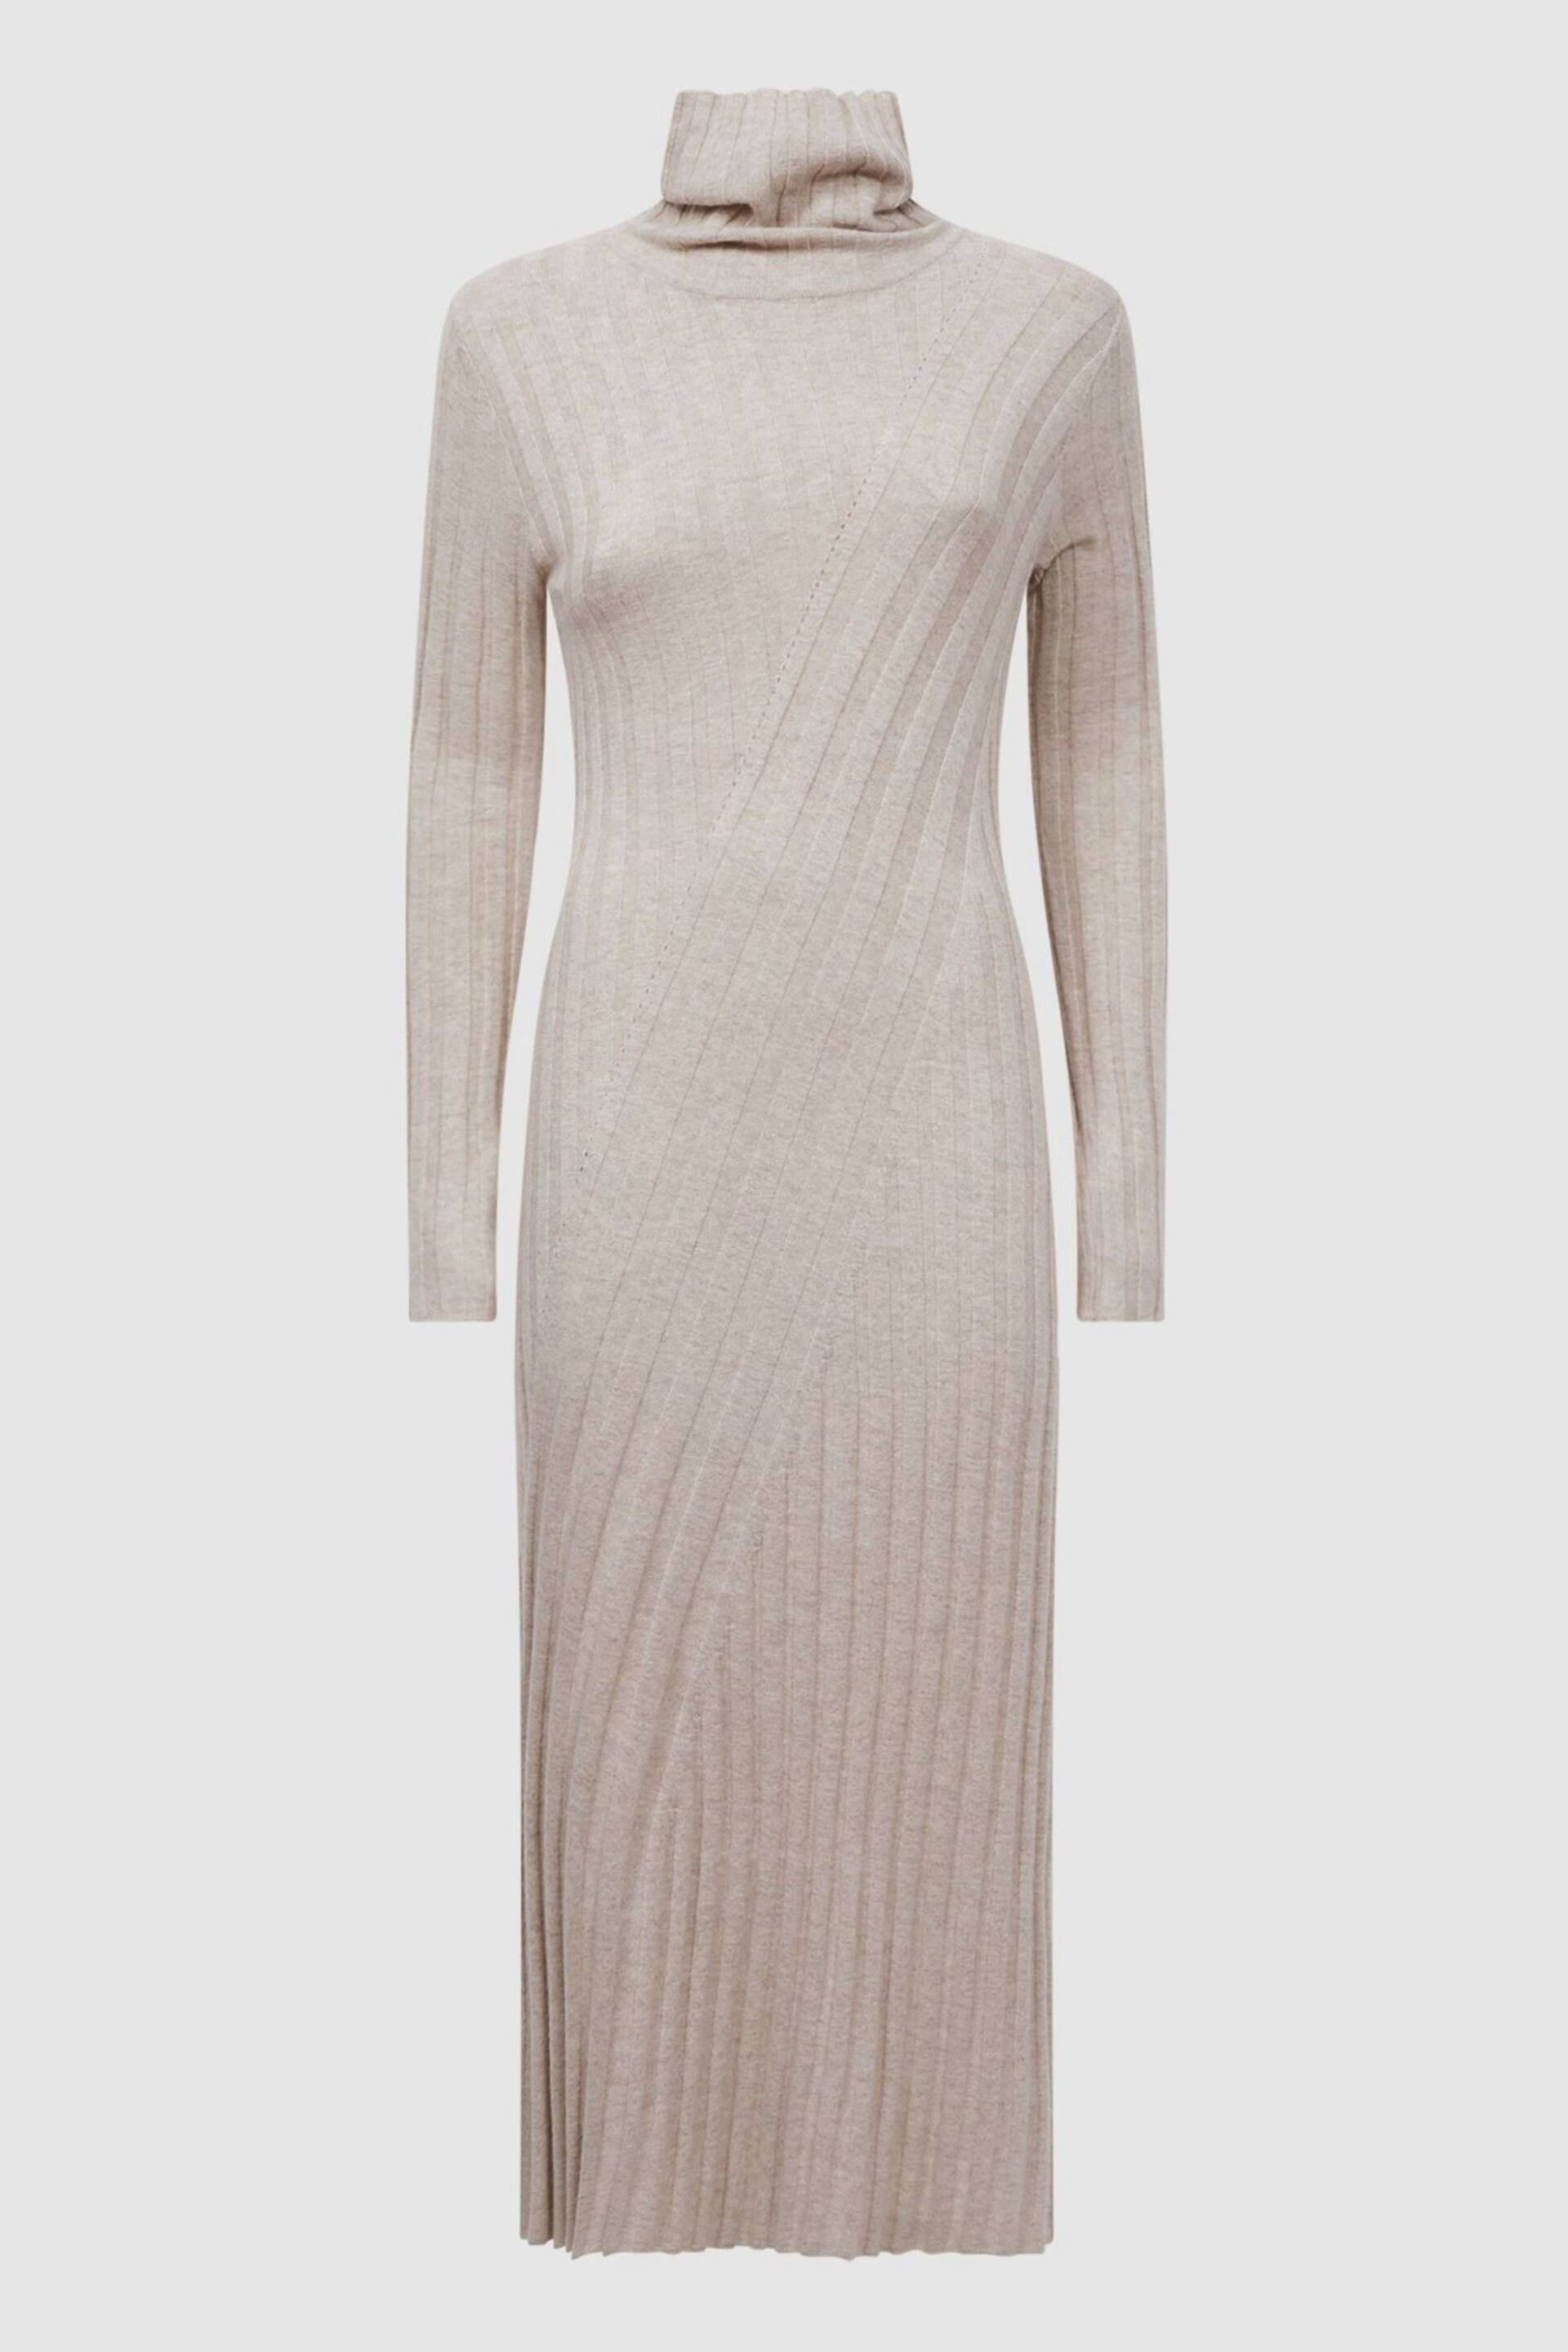 Reiss Neutral Cady Fitted Knitted Midi Dress - Image 2 of 6